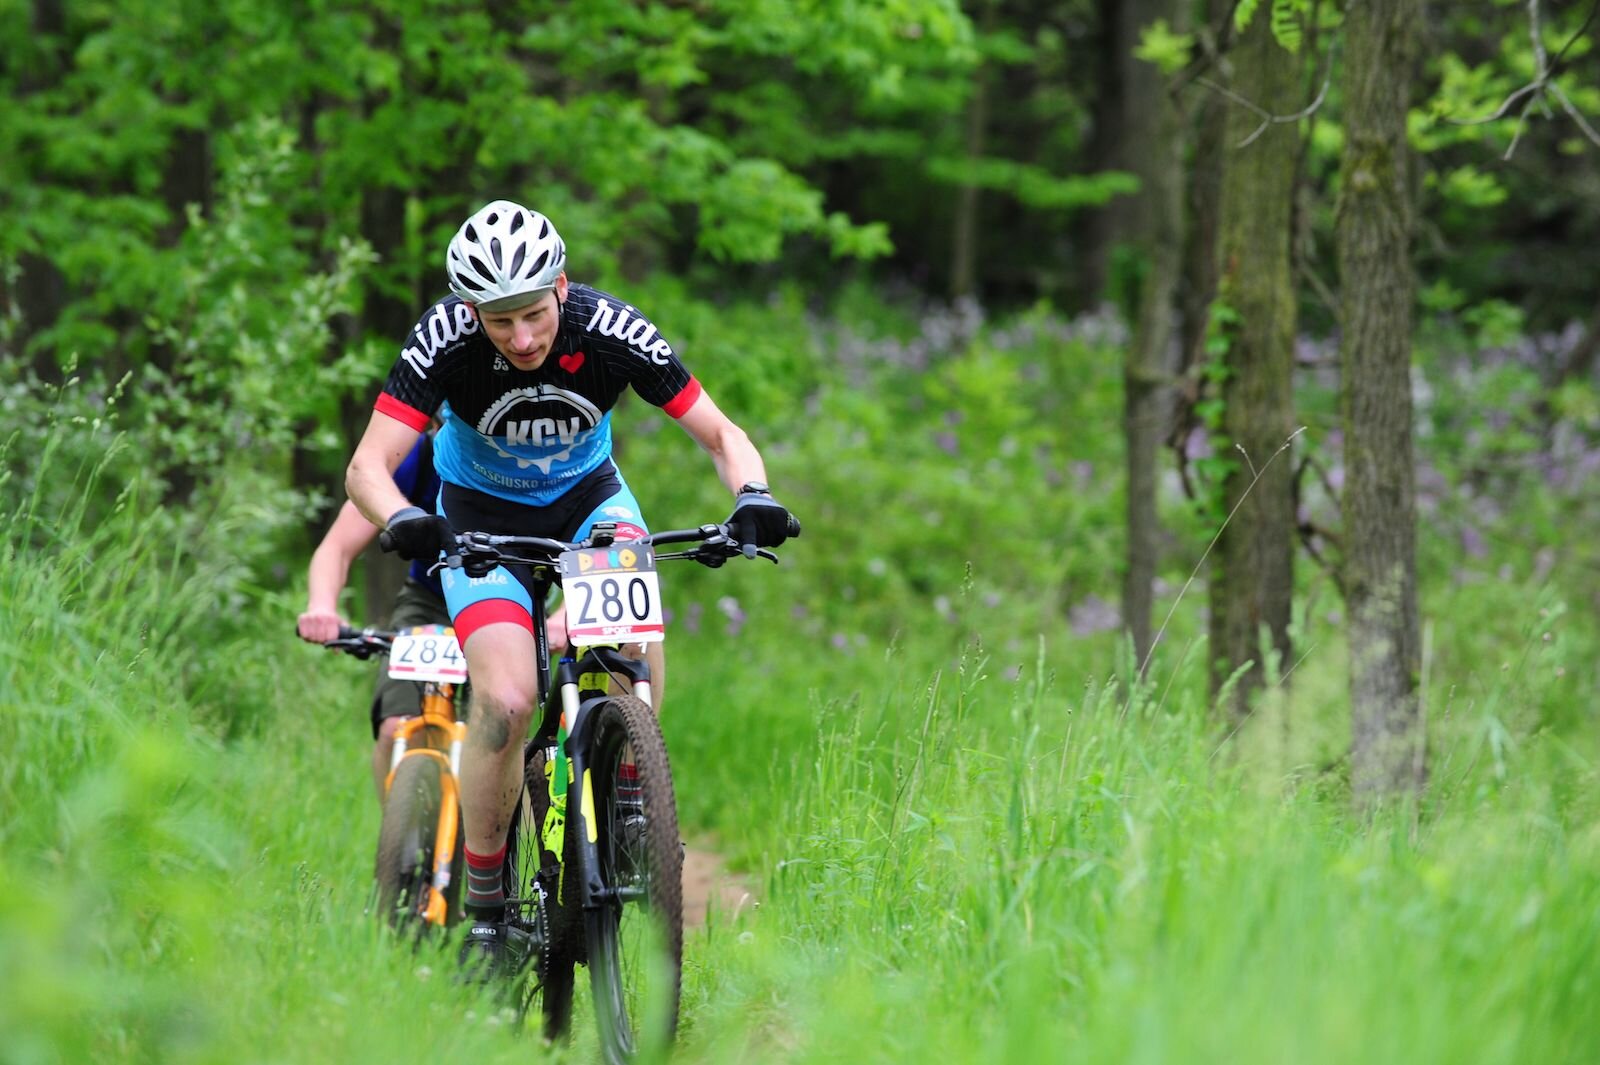 The unique bike festival offers mountain bike races and road races.